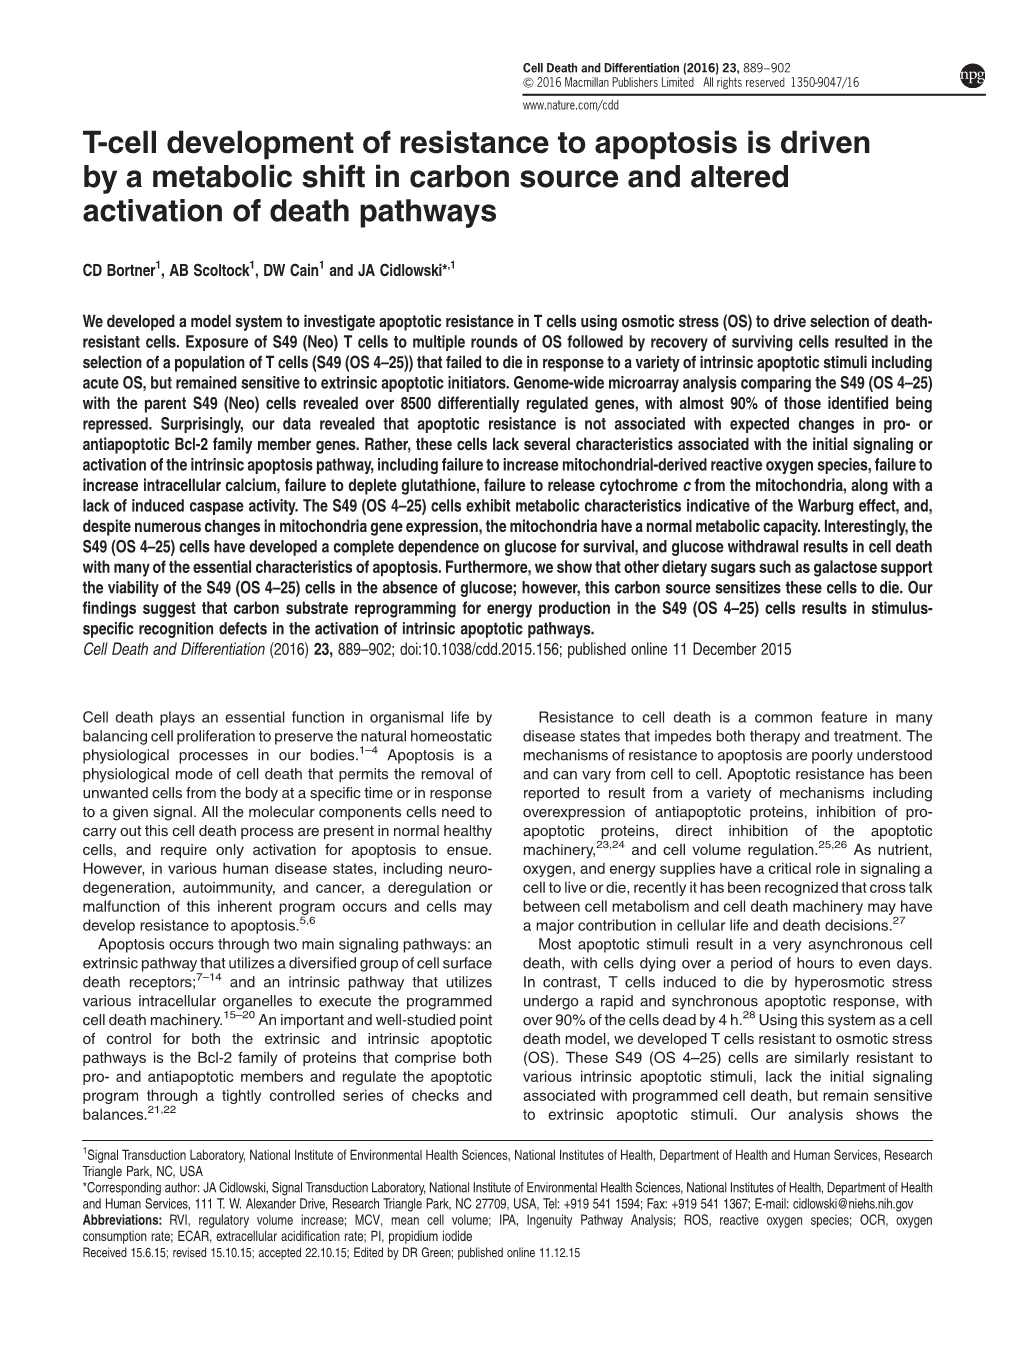 T-Cell Development of Resistance to Apoptosis Is Driven by a Metabolic Shift in Carbon Source and Altered Activation of Death Pathways